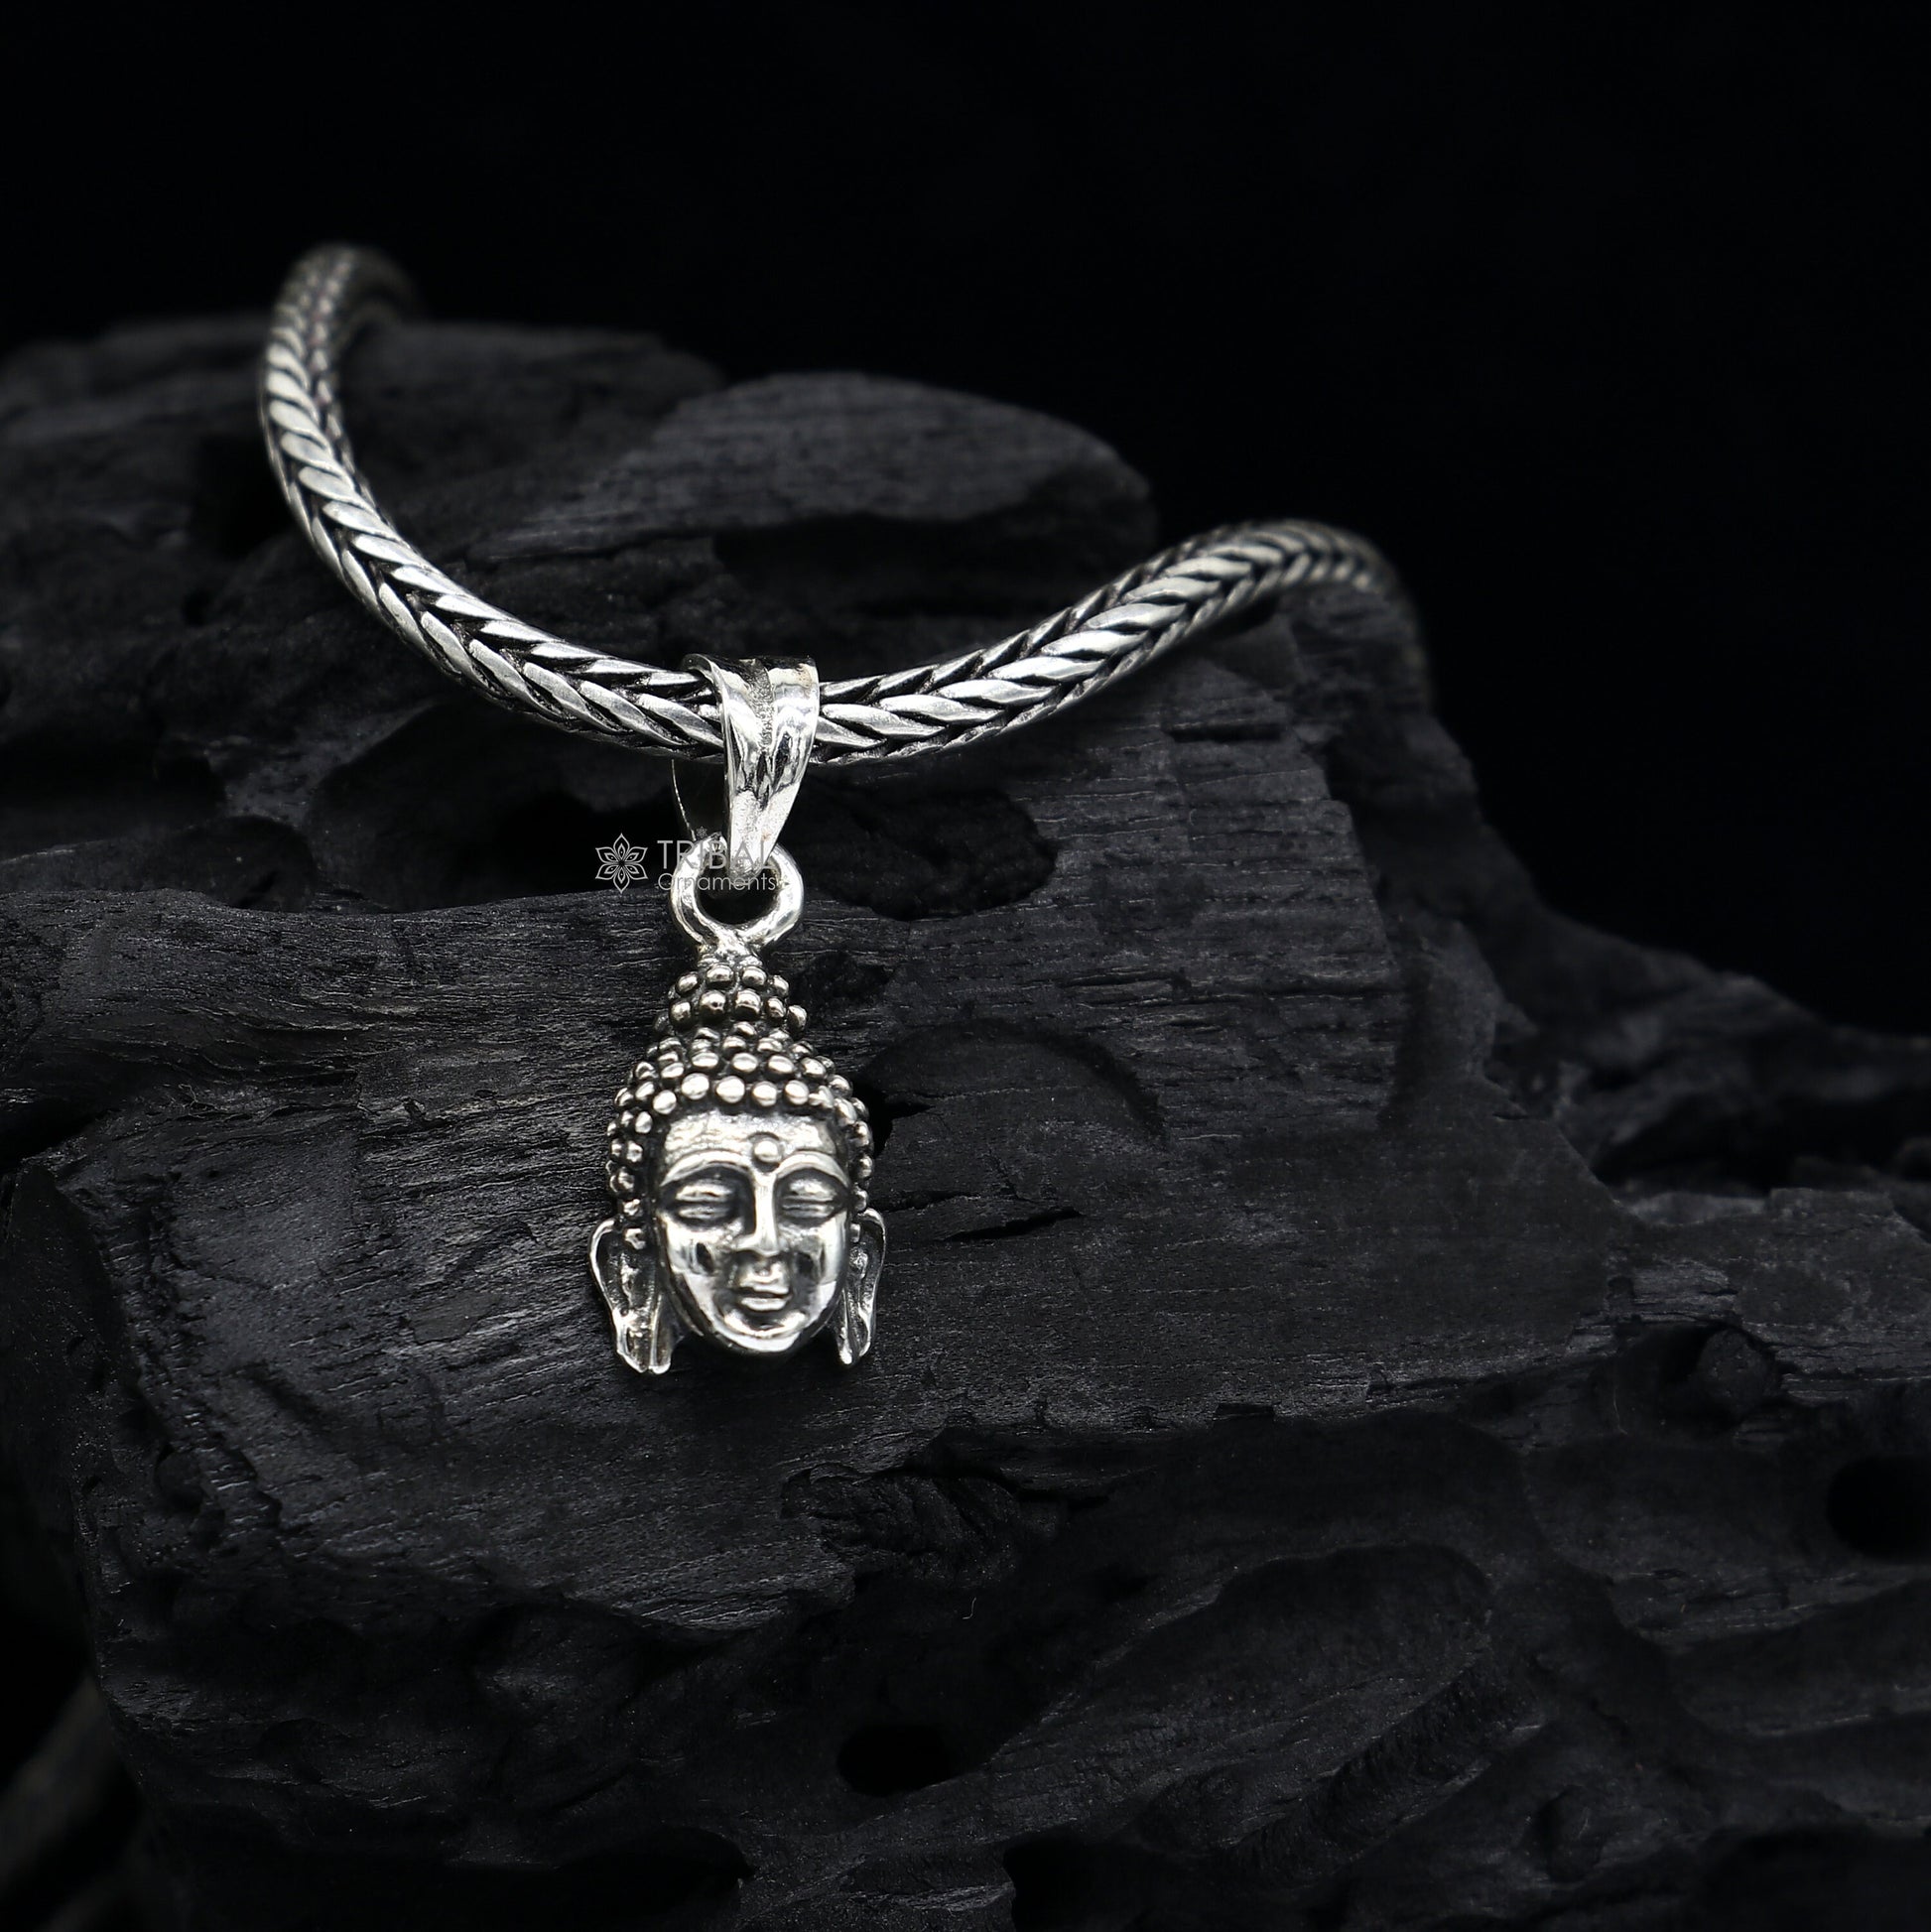 925 silver Lord Buddha face pendant pendant is worn close to the heart, symbolizing the aspiration to cultivate inner peace, wisdom nsp691 - TRIBAL ORNAMENTS